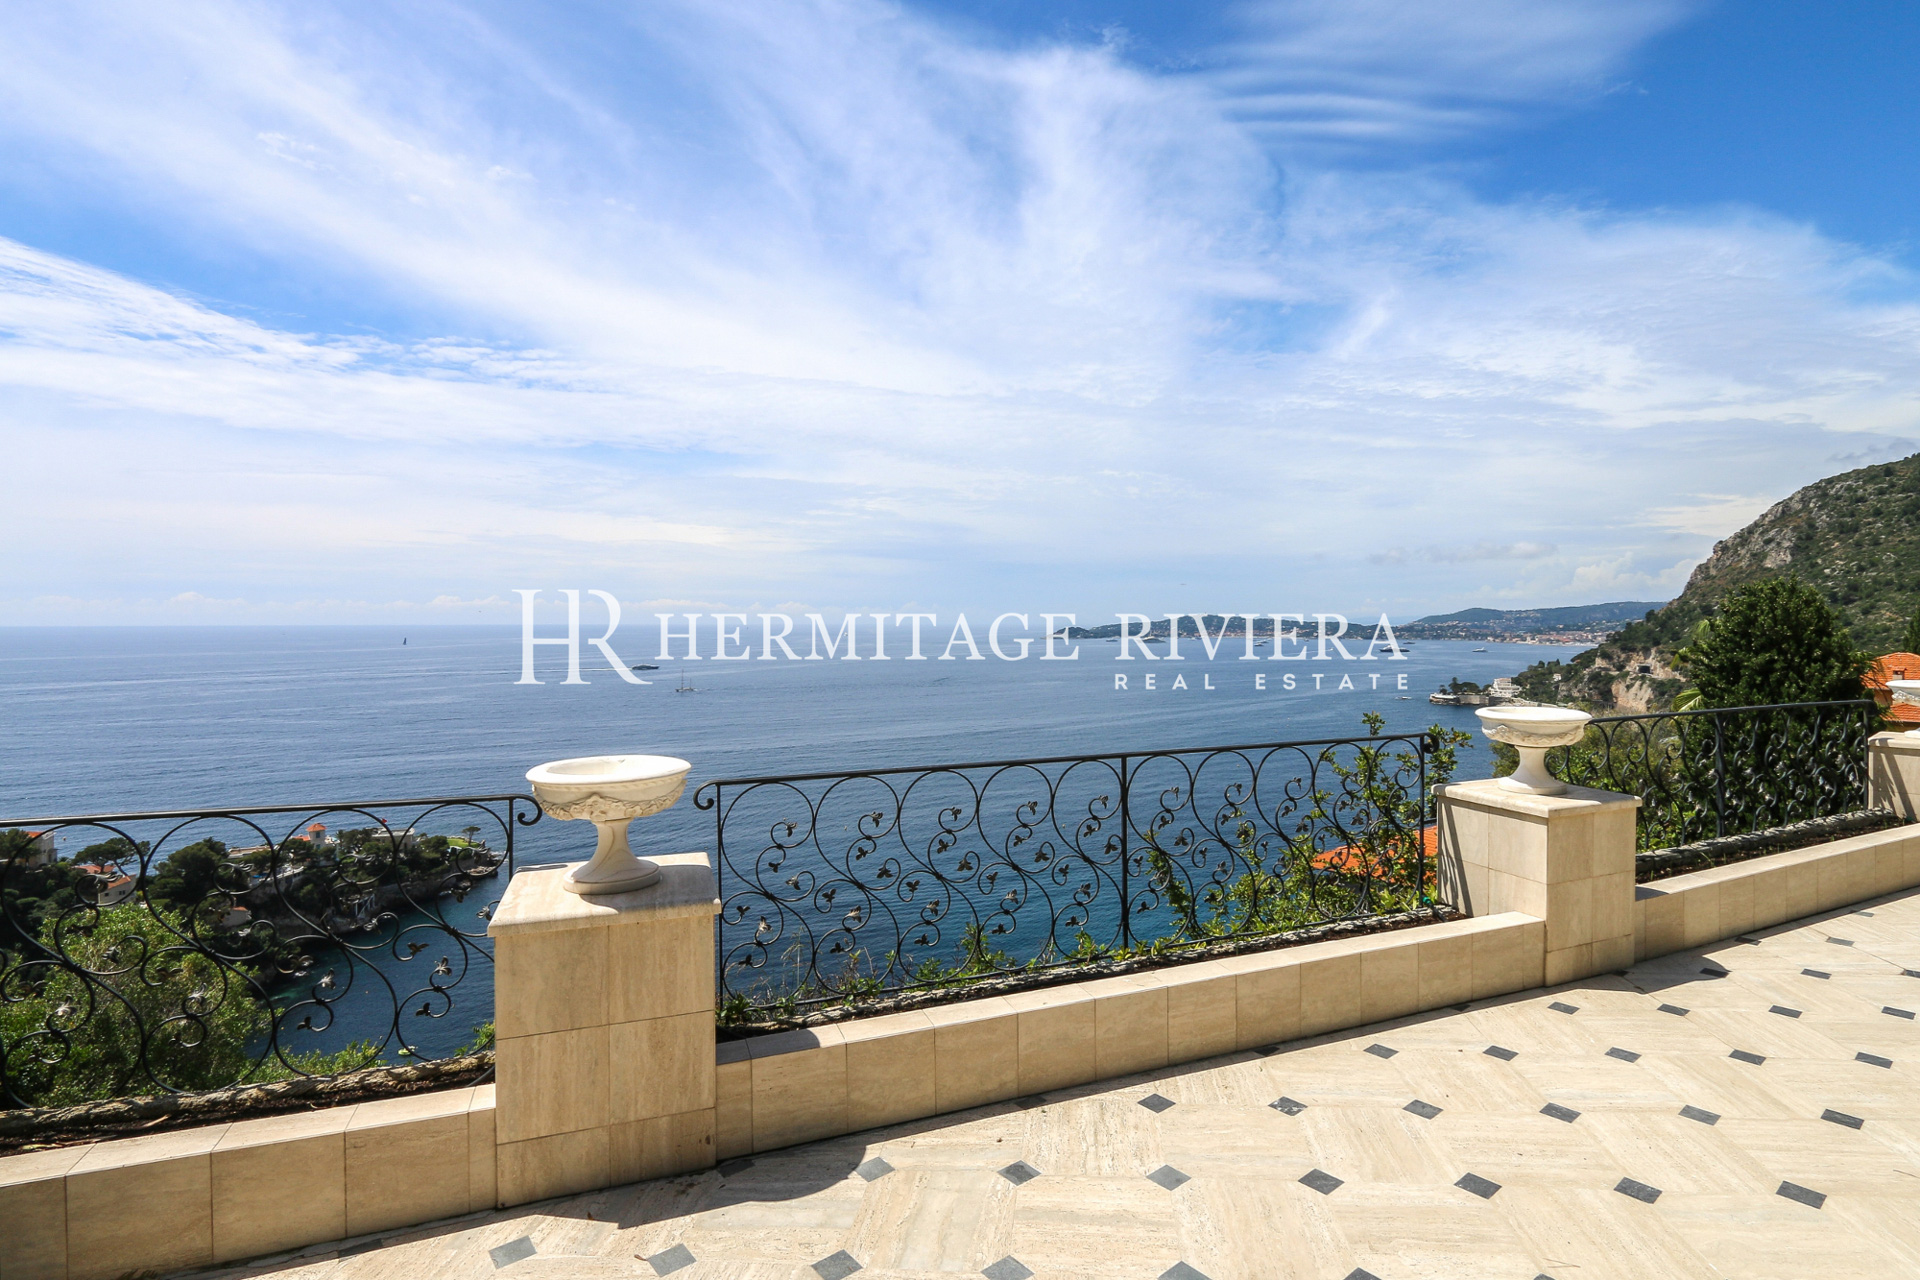 Property close Monaco with panoramic view (image 3)